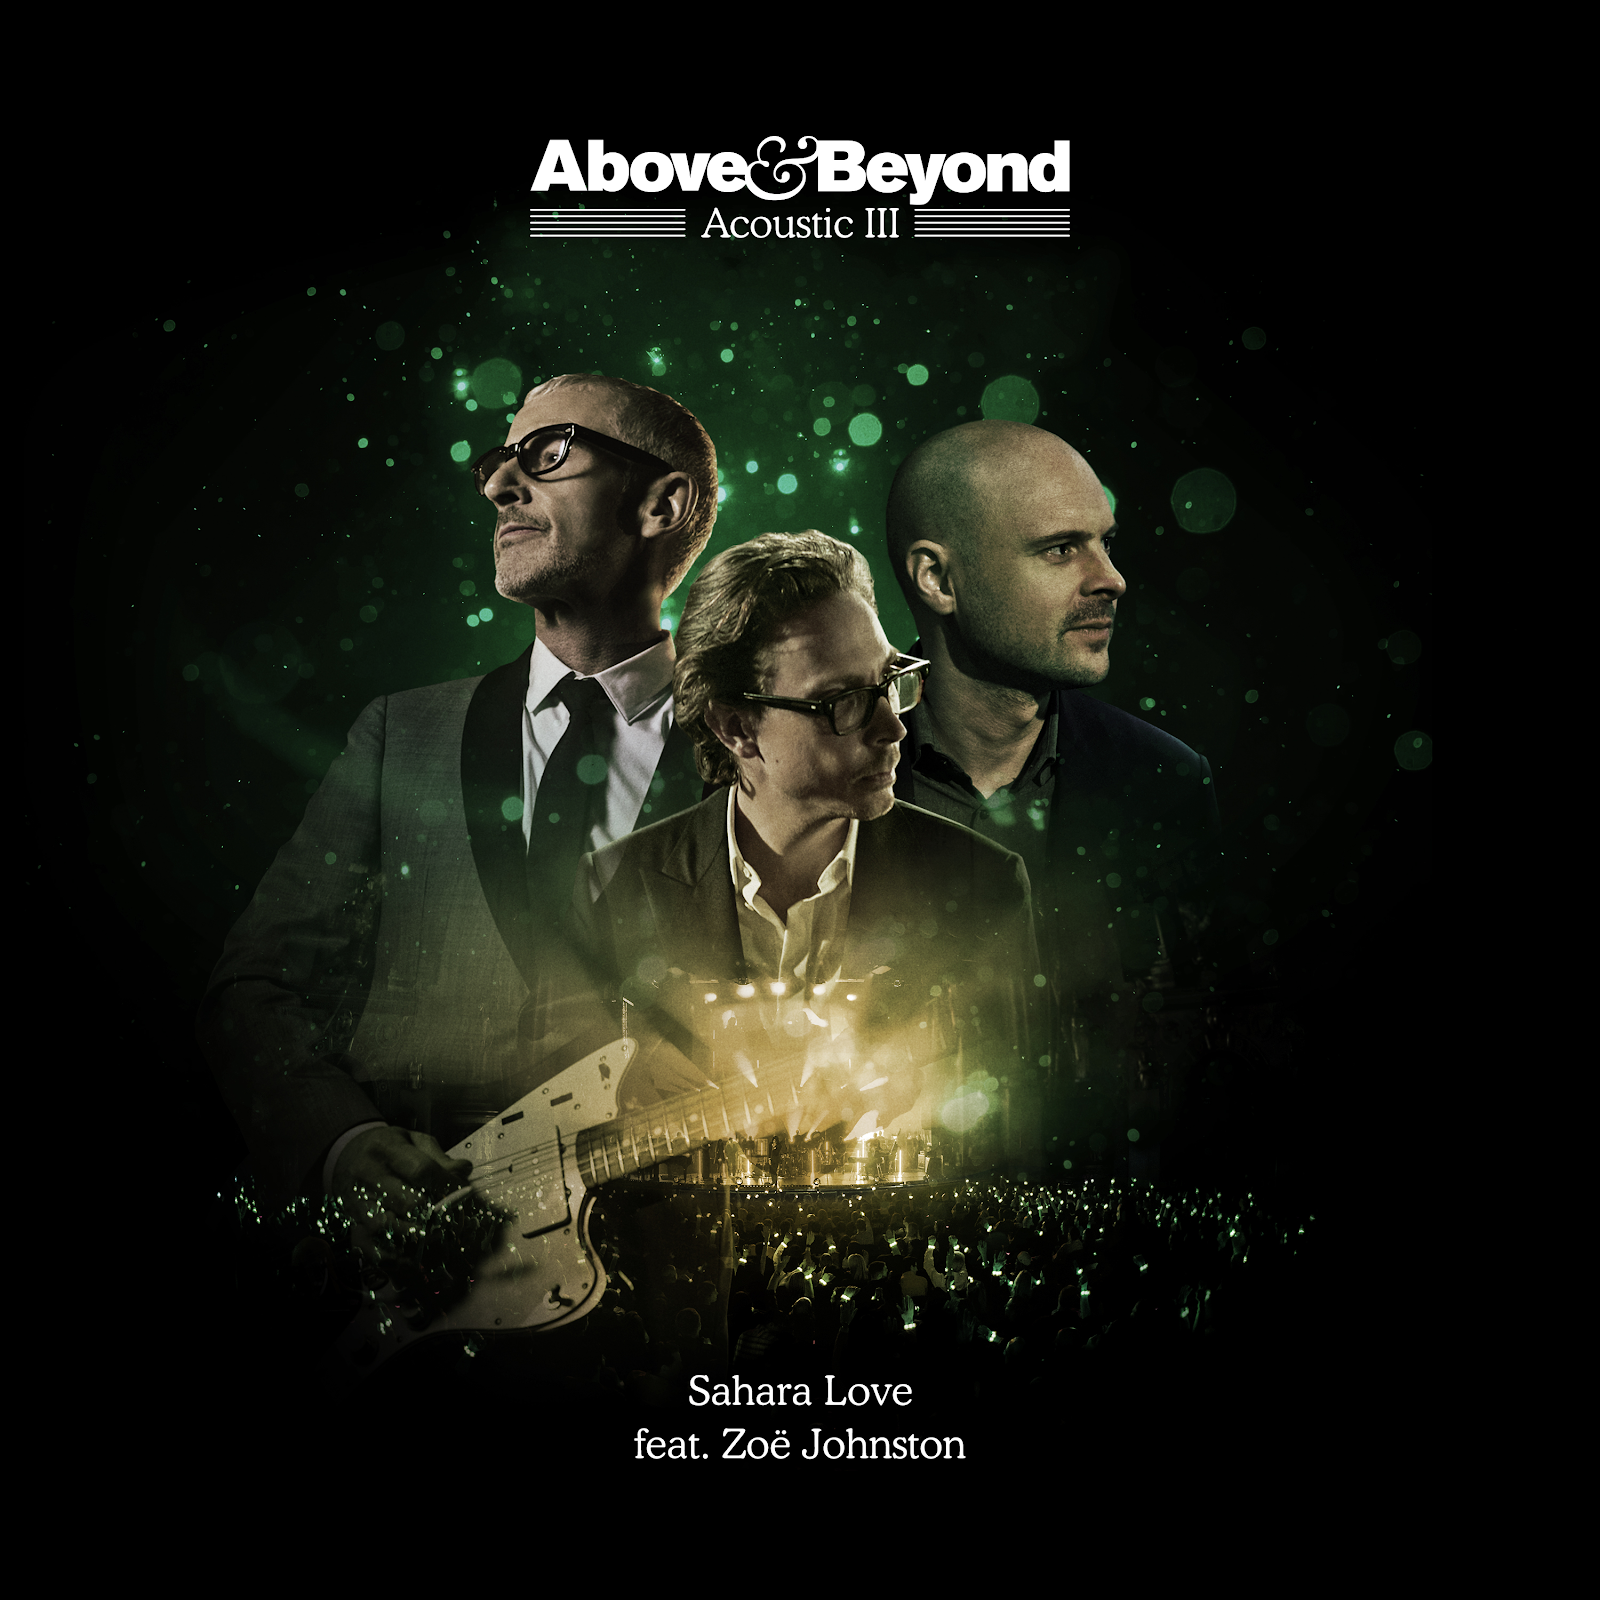 Above and Beyond feat. Zoë Johnston presents Sahara Love (Acoustic) on Anjunabeats